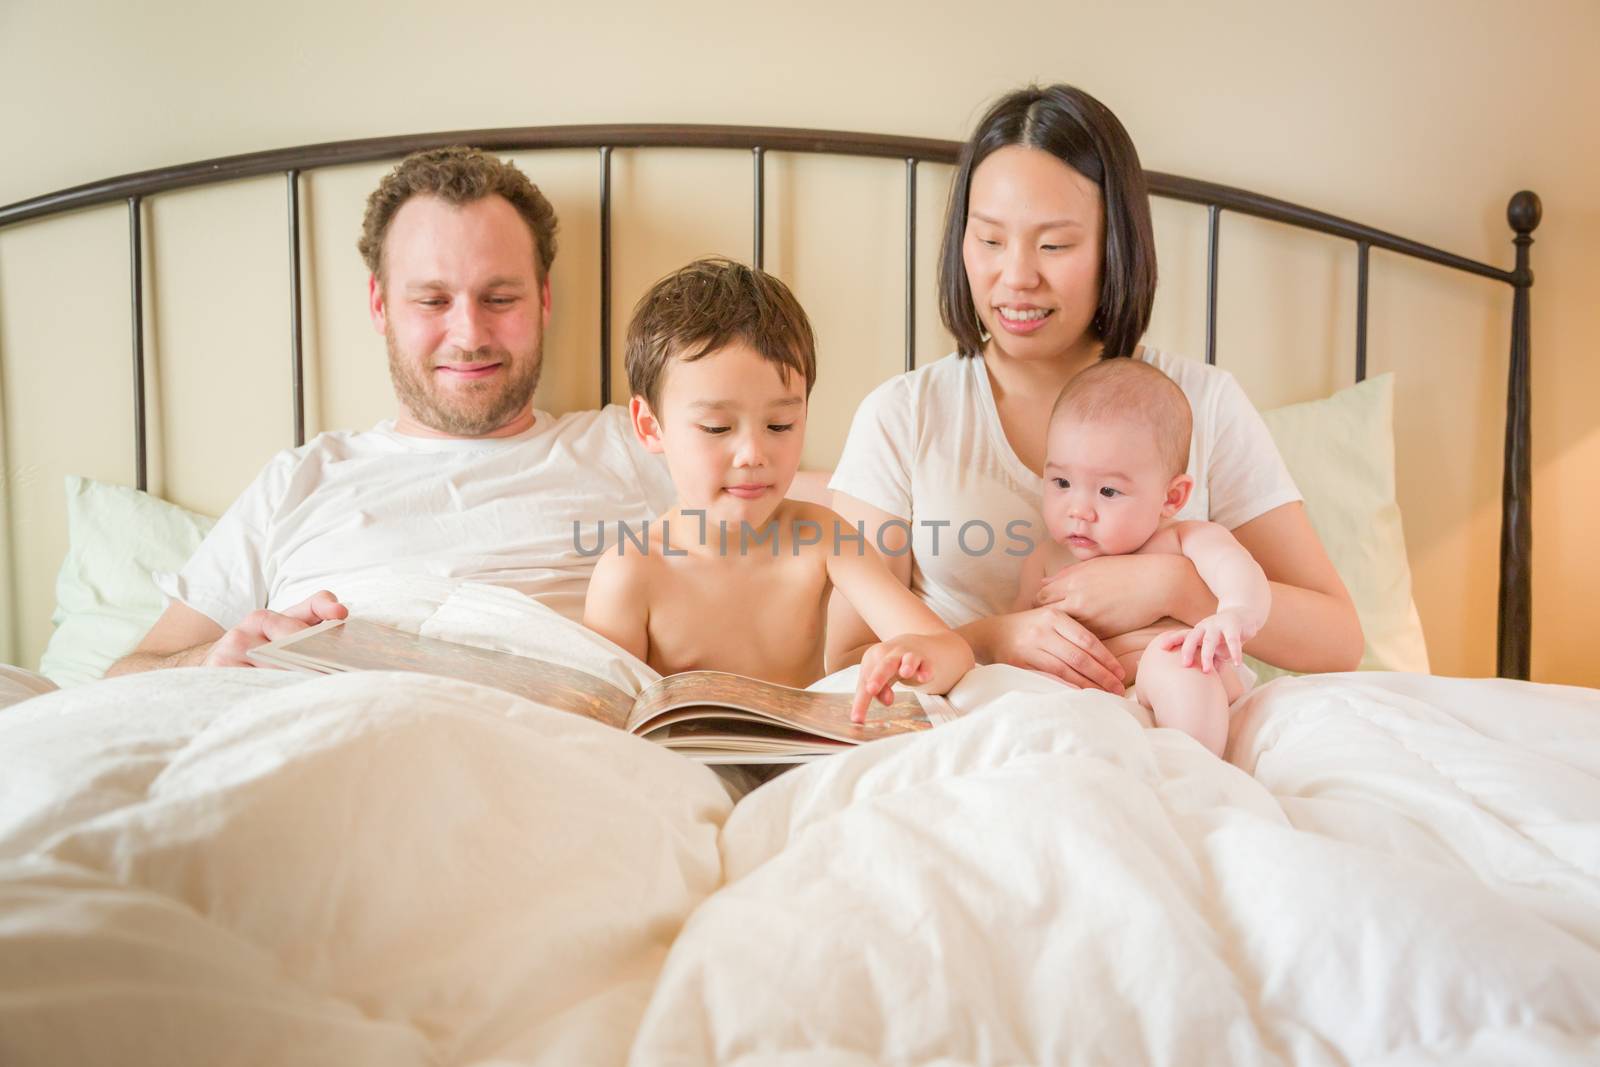 Young Mixed Race Chinese and Caucasian Baby Boys Reading a Book In Bed with Their Father and Mother.